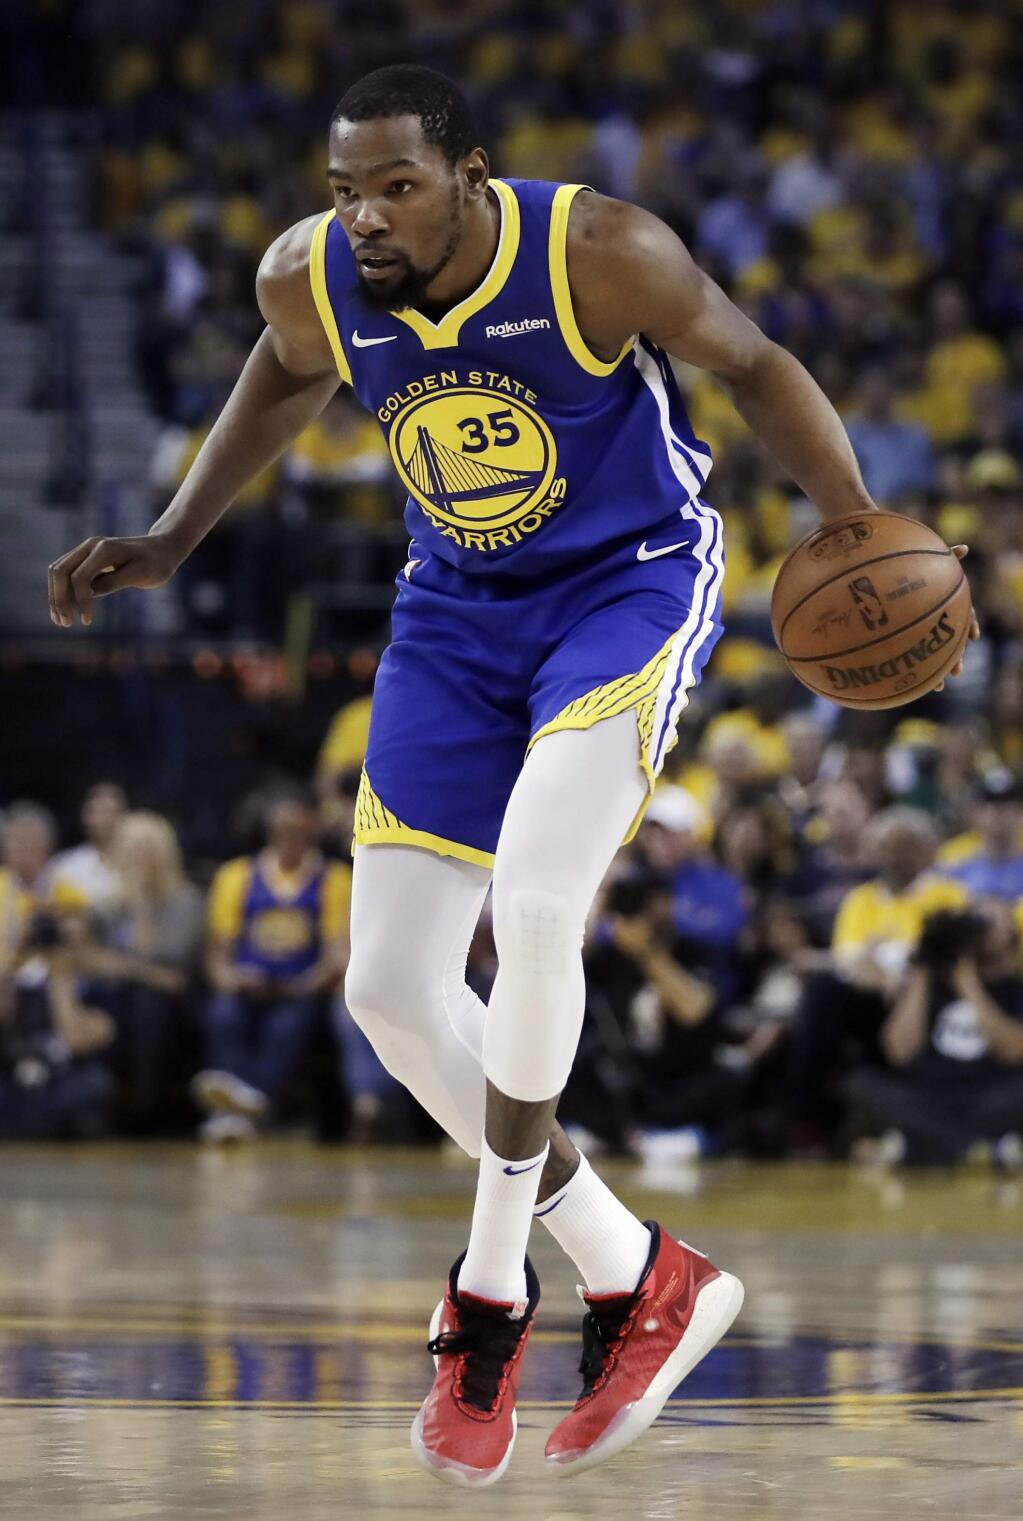 Golden State Warriors' Kevin Durant, right, drives the ball against Los Angeles Clippers' Lou Williams during the first half in Game 5 of a first-round NBA basketball playoff series, Wednesday, April 24, 2019, in Oakland, Calif. (AP Photo/Ben Margot)